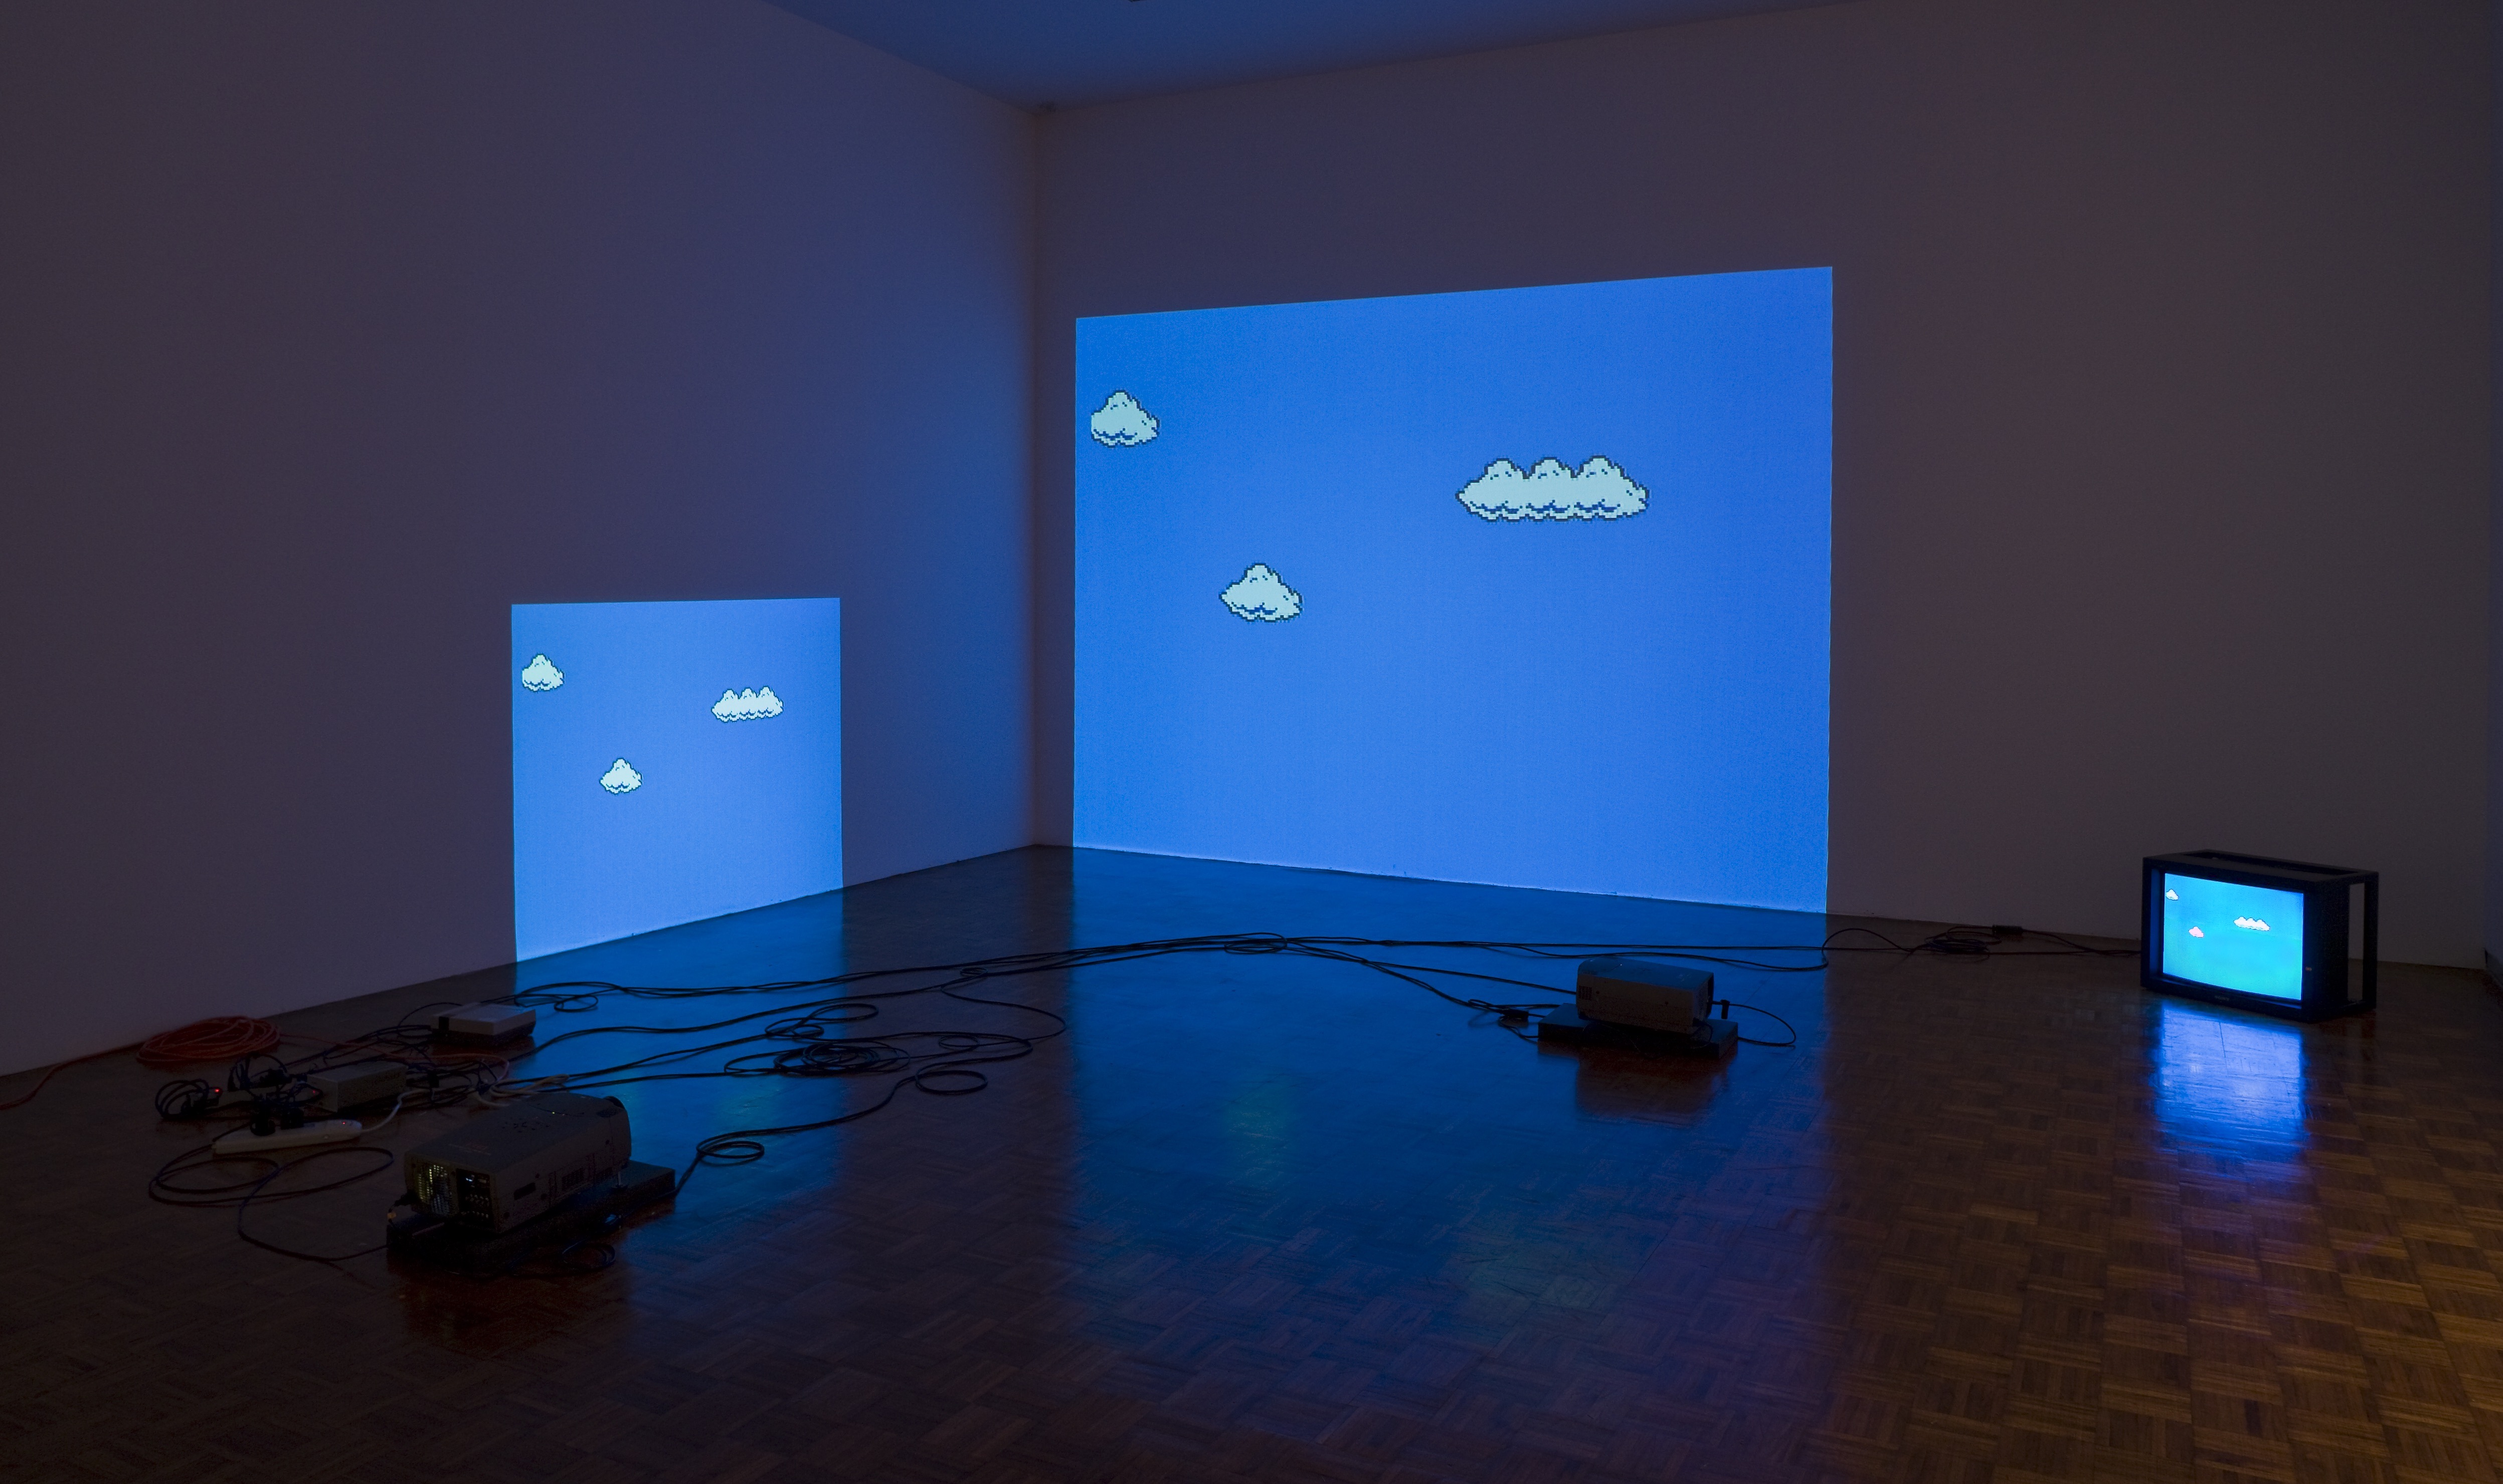 Cory Arcangel. Super Mario Clouds, 2002– . (Installation view, Synthetic, Whitney Museum of American Art, 2009.) Handmade hacked Super Mario Brothers cartridge and Nintendo NES video game system. Edition no. 2/5. Whitney Museum of American Art, New York; purchase with funds from the Painting and Sculpture Committee 2005.10.© Cory Arcangel. Courtesy of Cory Arcangel.